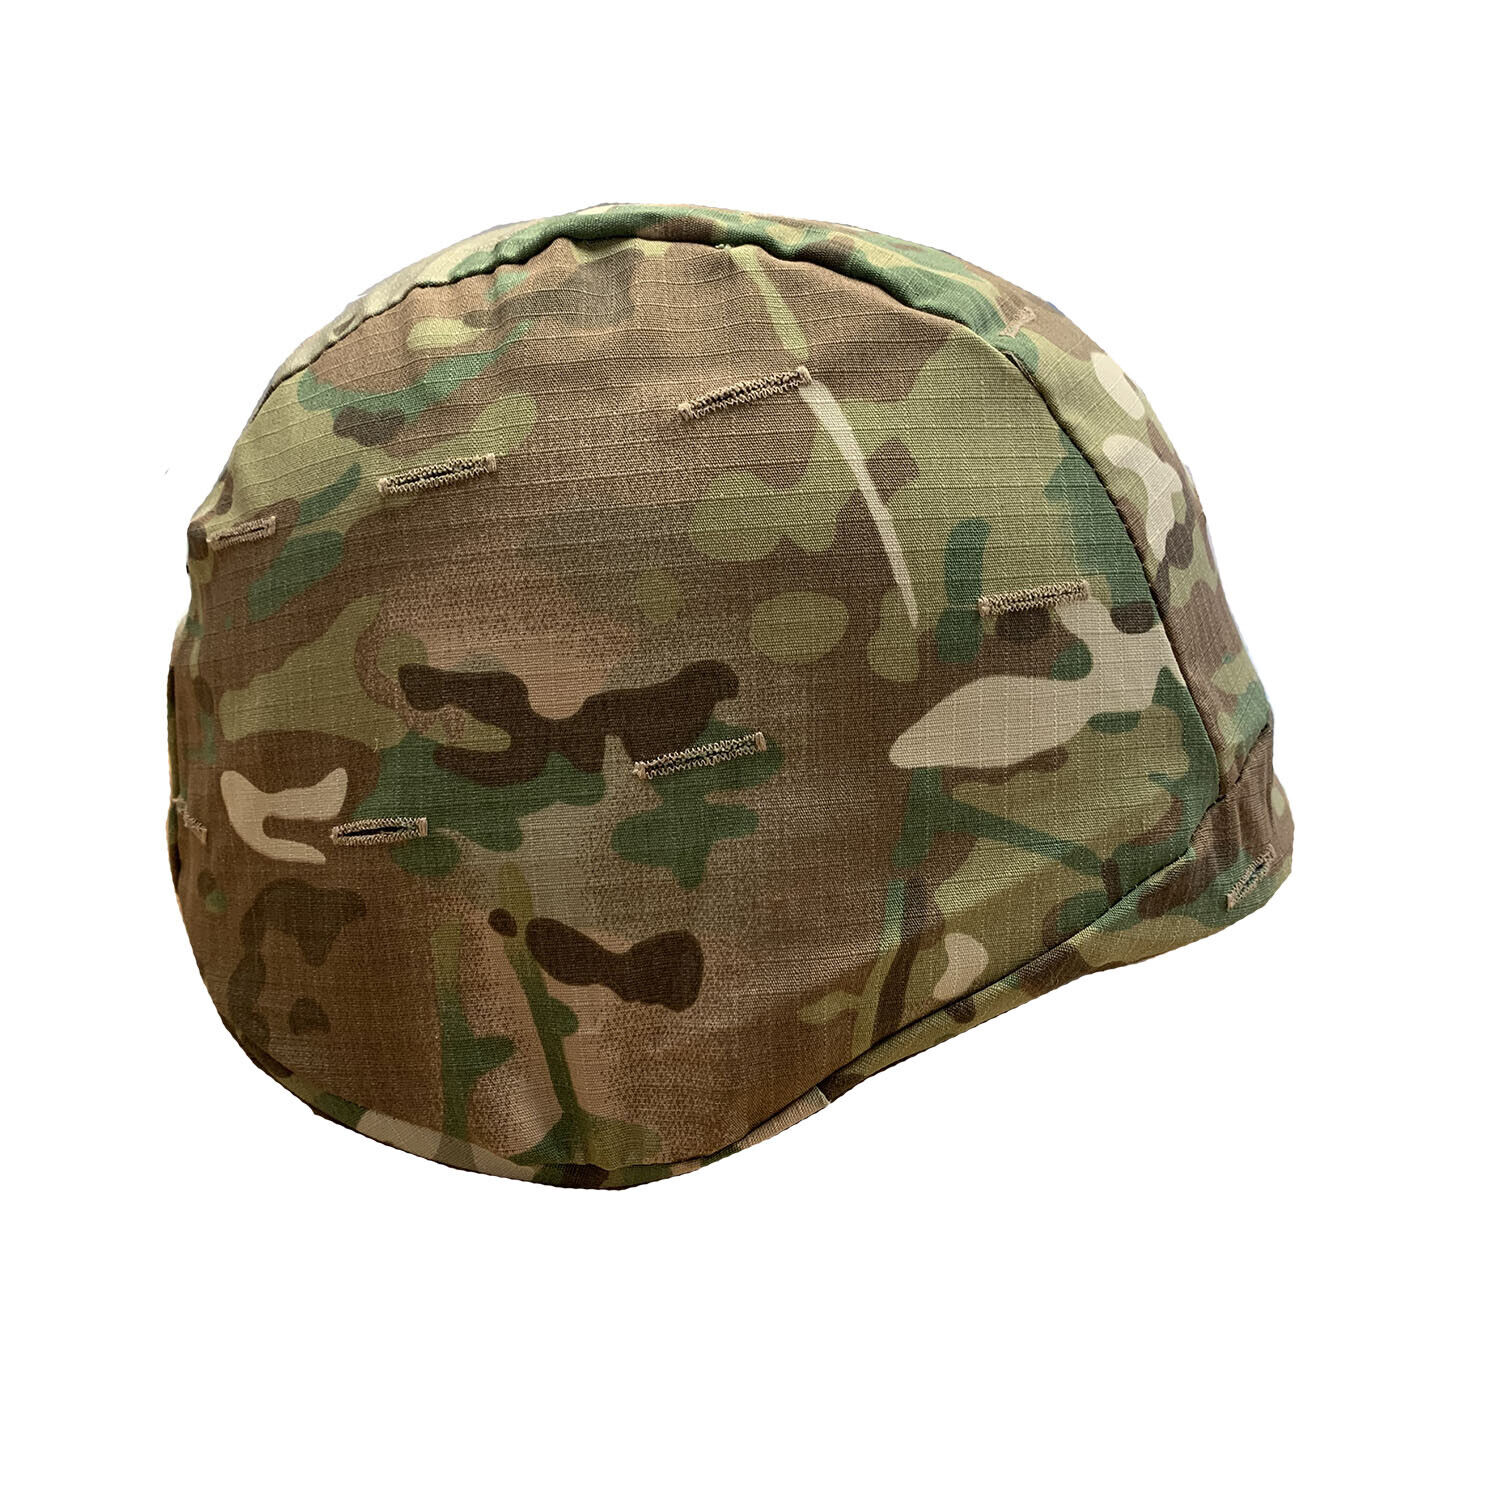 CSG Multicam Camo Helmet Covers Fits M88 and MICH Helmets 